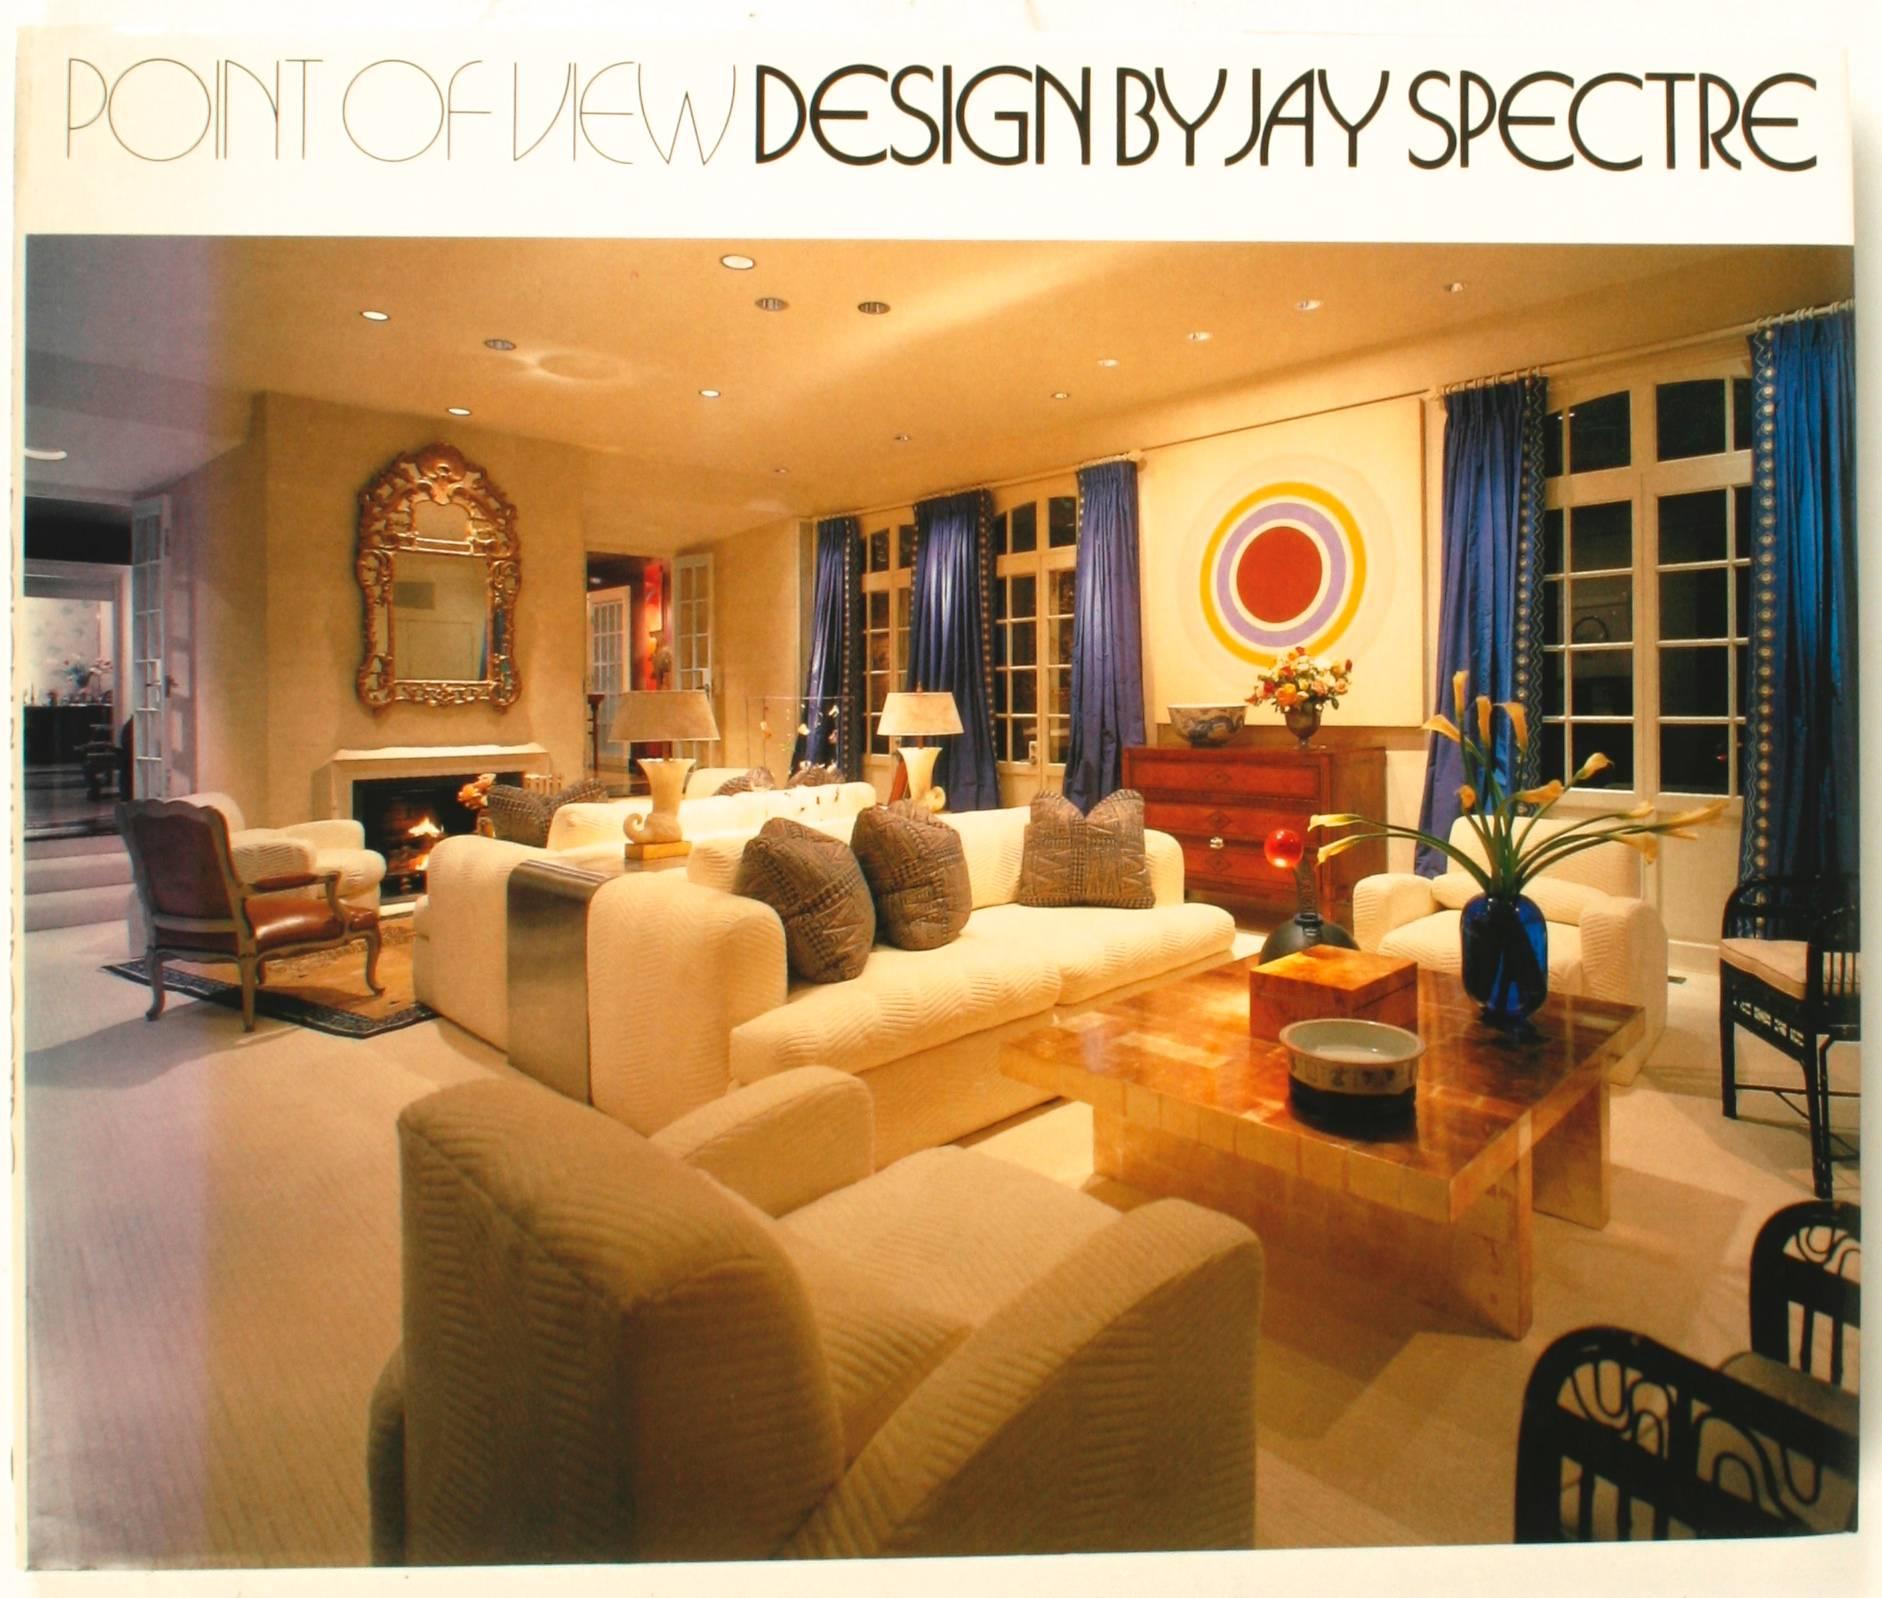 Point of View, Design by Jay Spectre. 1st Ed, Bulfinch Press 1991. 144 color illustrations, 15 black and white photos of the design work of this daring and innovative artist combining optimum function with luxury and versatility.
NPT Books, a